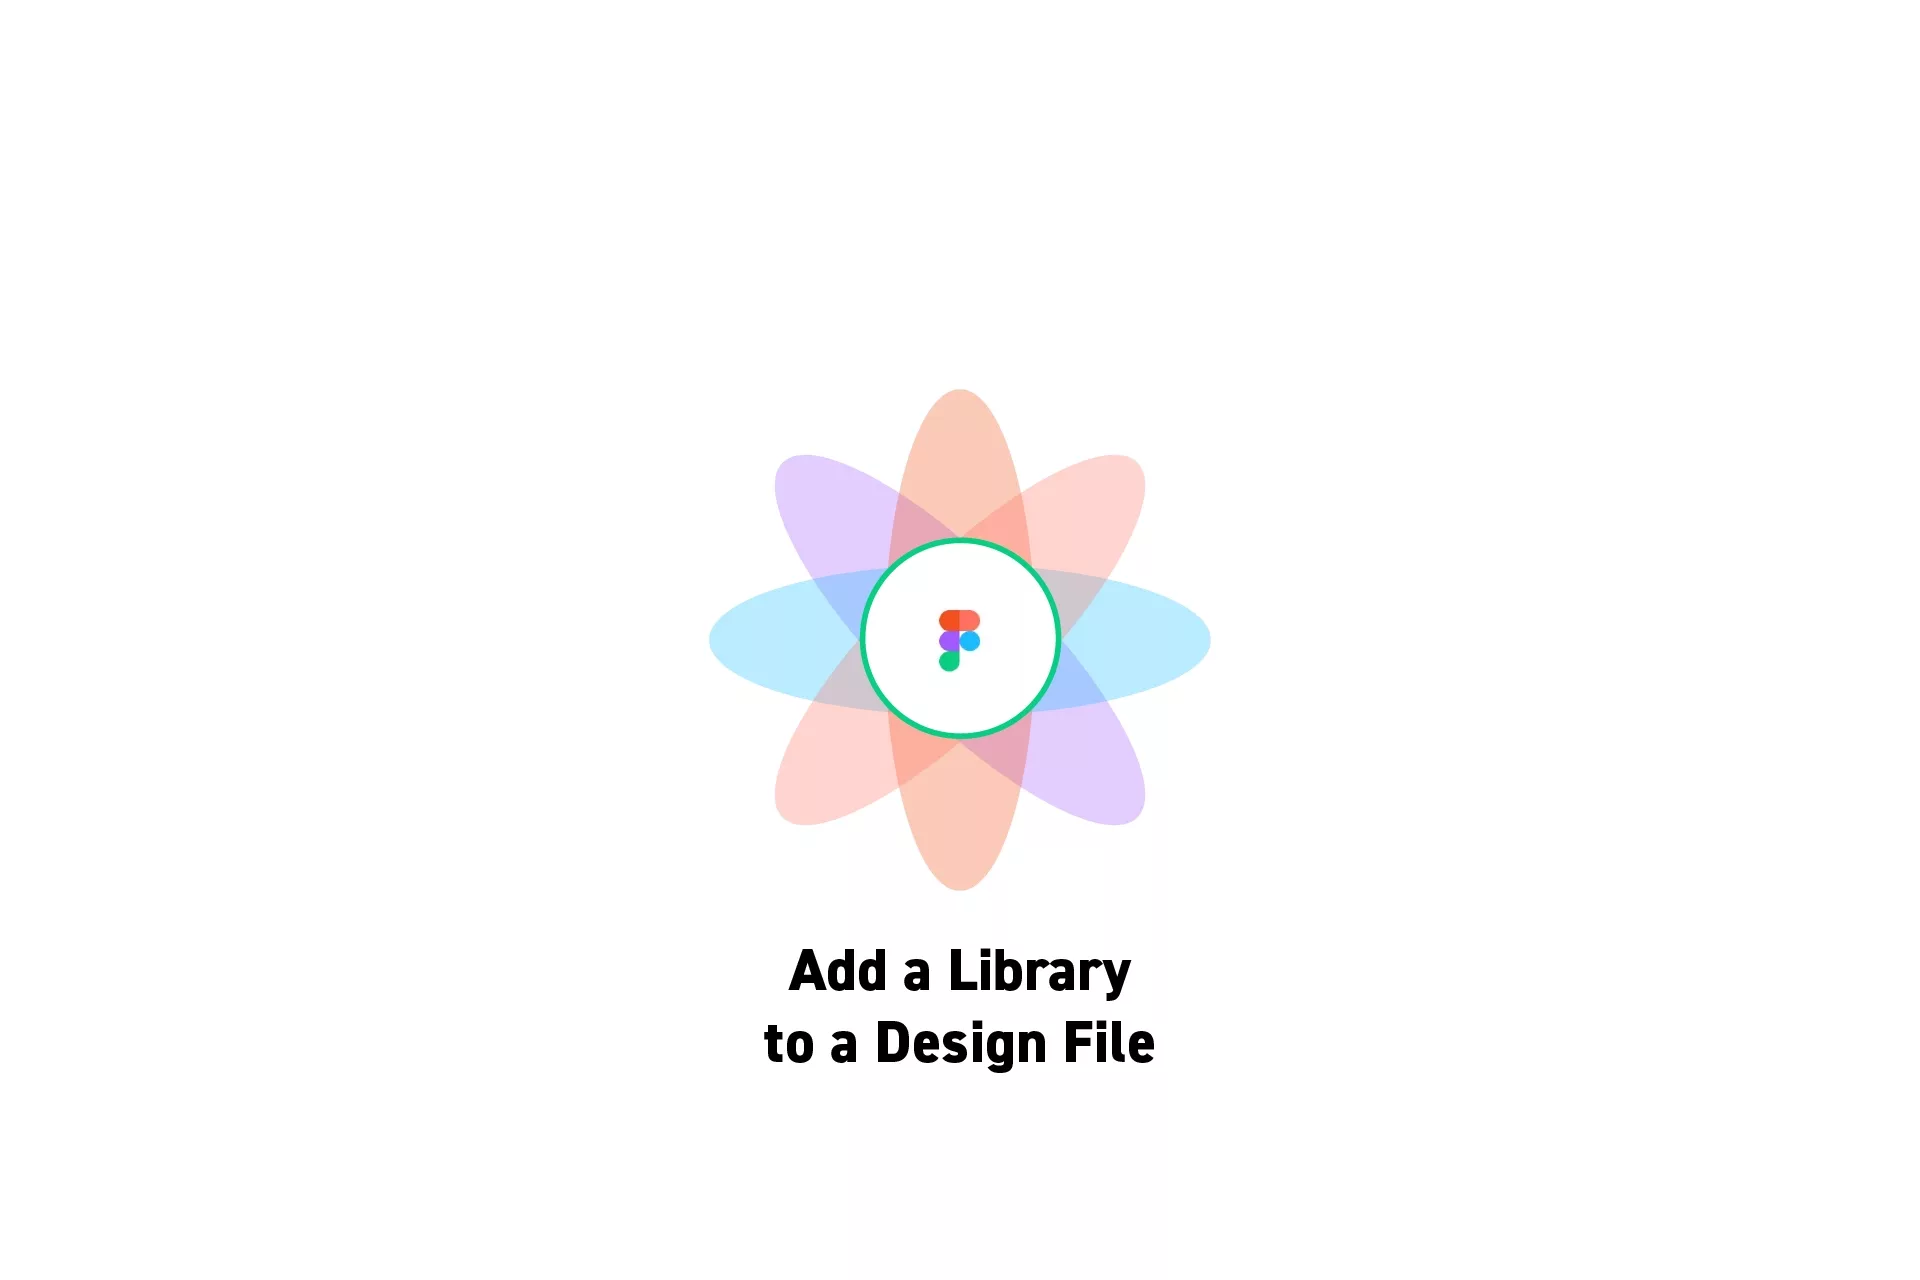 A flower that represents Figma with the text "Add a Library to a Design File" beneath it.